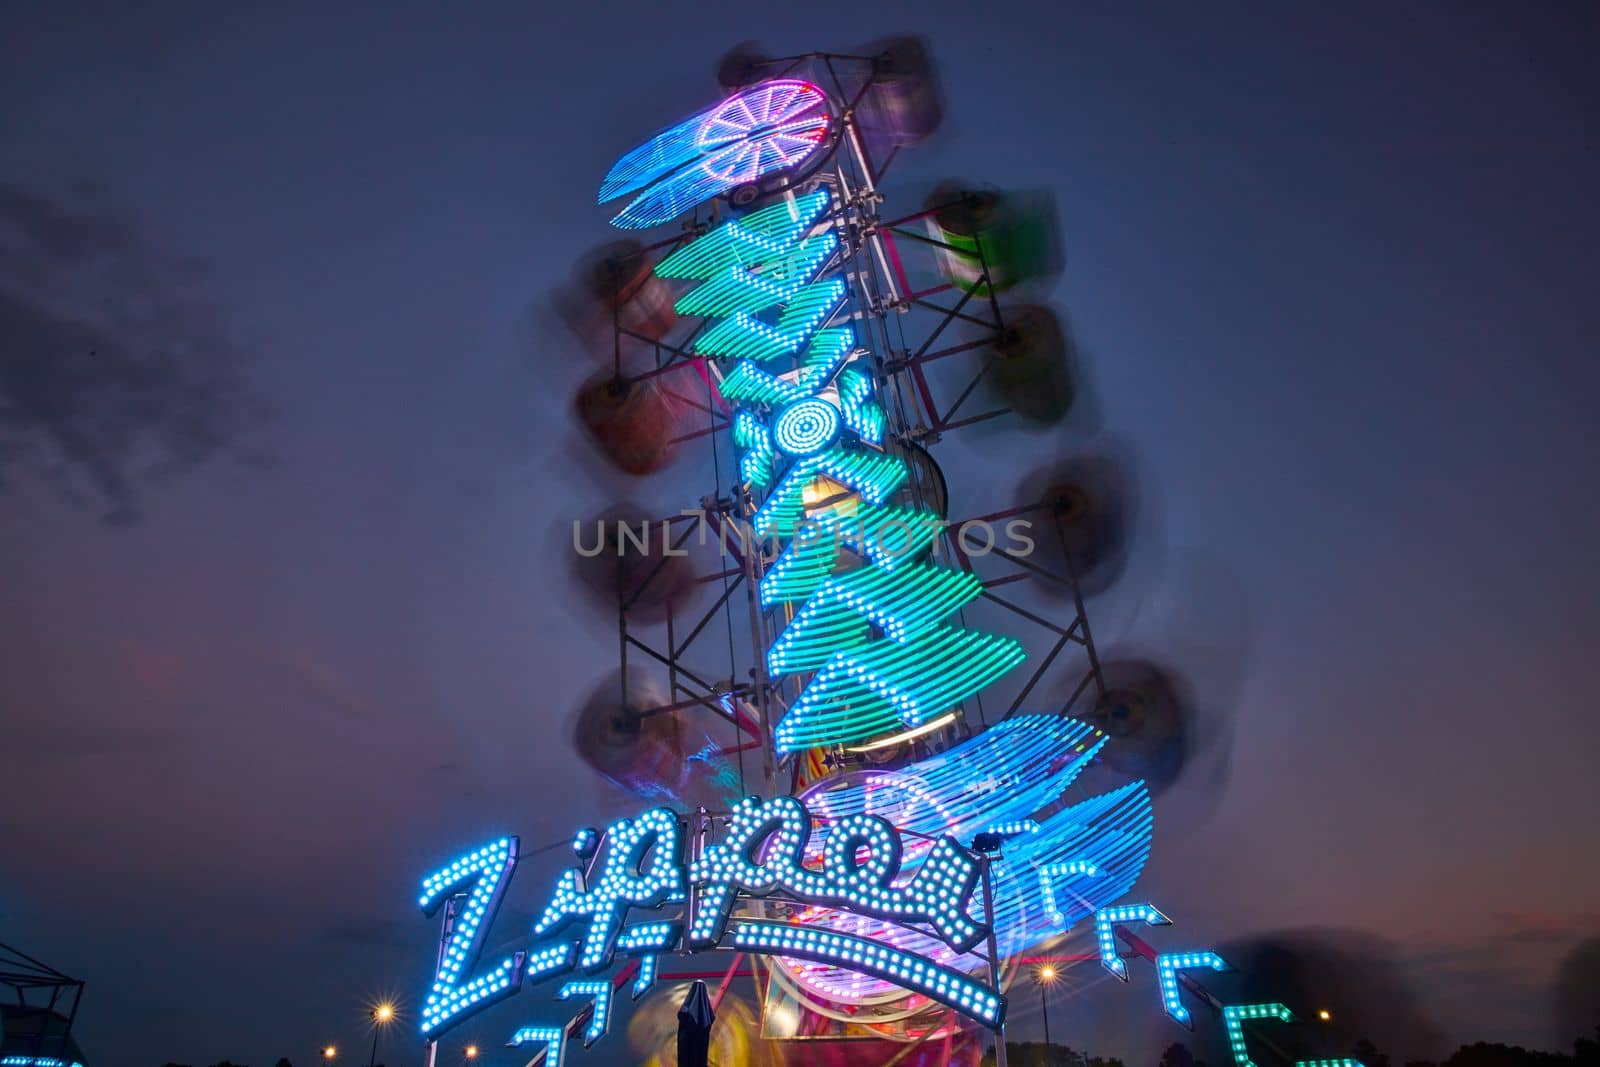 Image of Zipper carnival ride with blurred lights during dusk at county fair